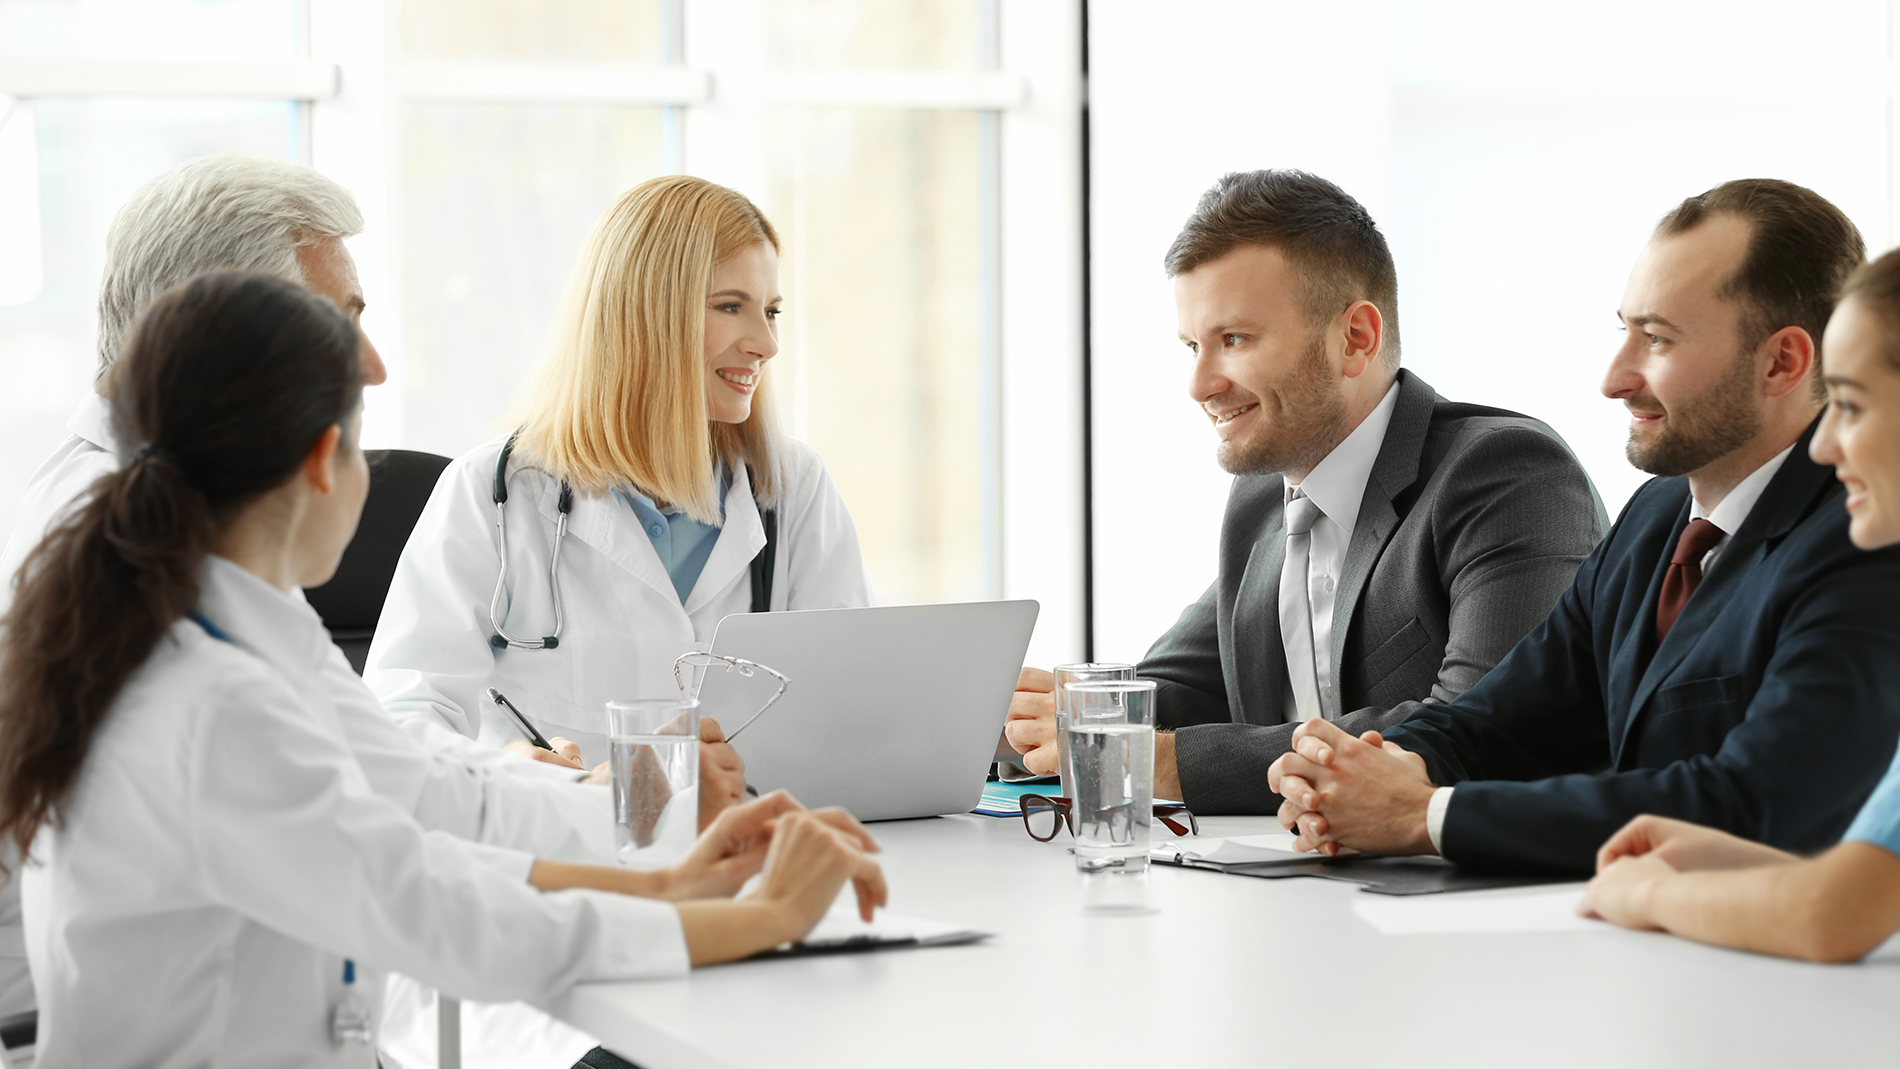 Generic stock photo of doctor with people dressed in suits.